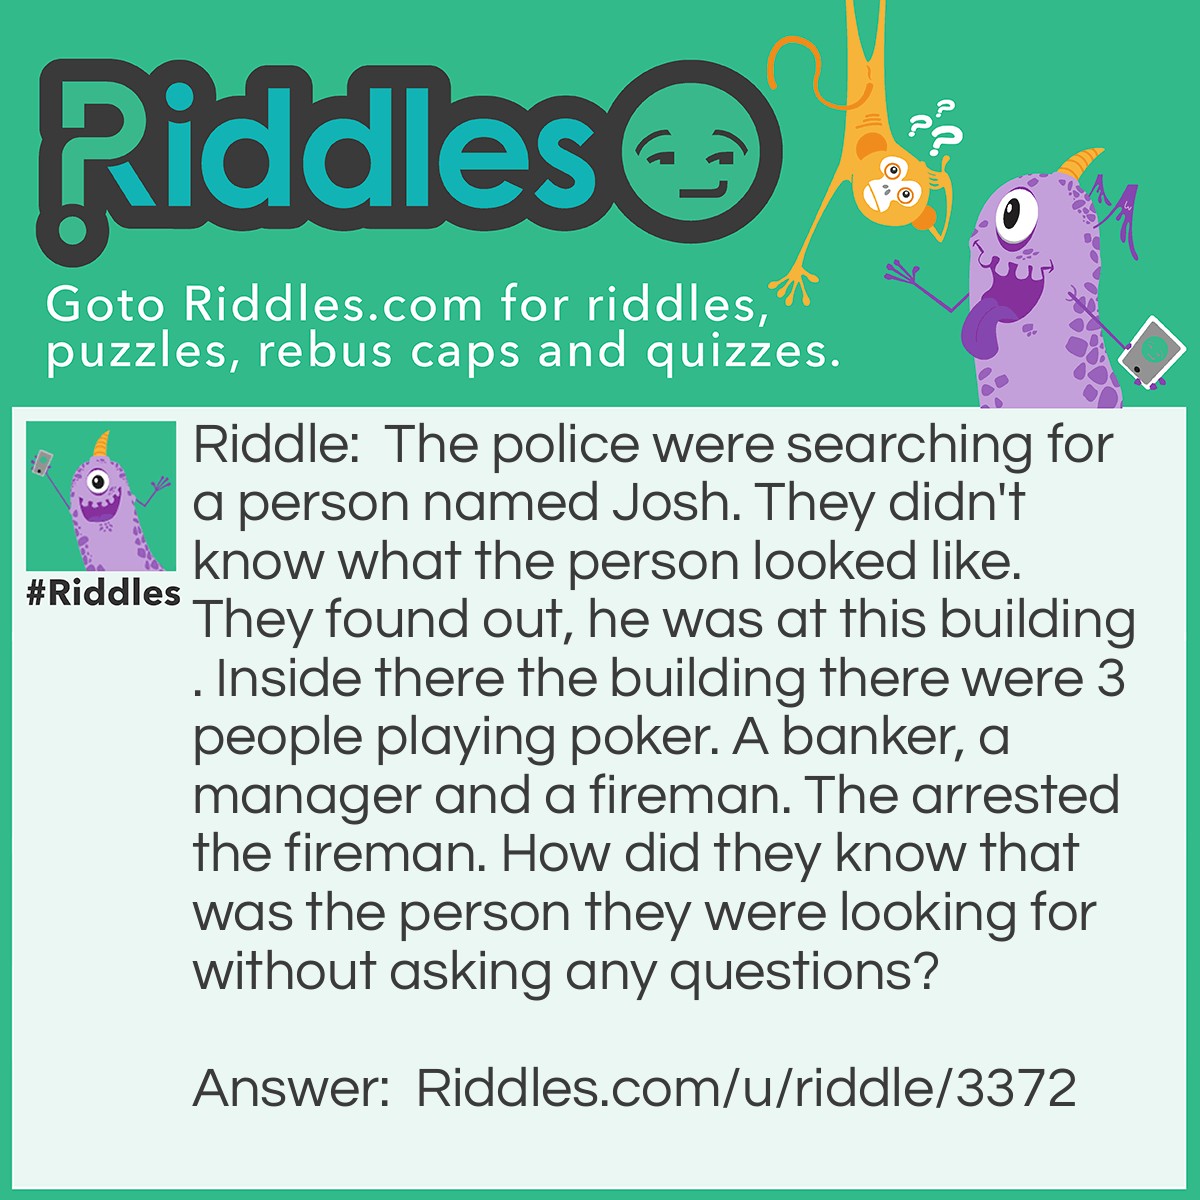 Riddle: The police were searching for a person named Josh. They didn't know what the person looked like. They found out, he was at this building. Inside there the building there were 3 people playing poker. A banker, a manager and a fireman. The arrested the fireman. How did they know that was the person they were looking for without asking any questions? Answer: The fireman was the only boy. He was called a fireman, not firefighter.